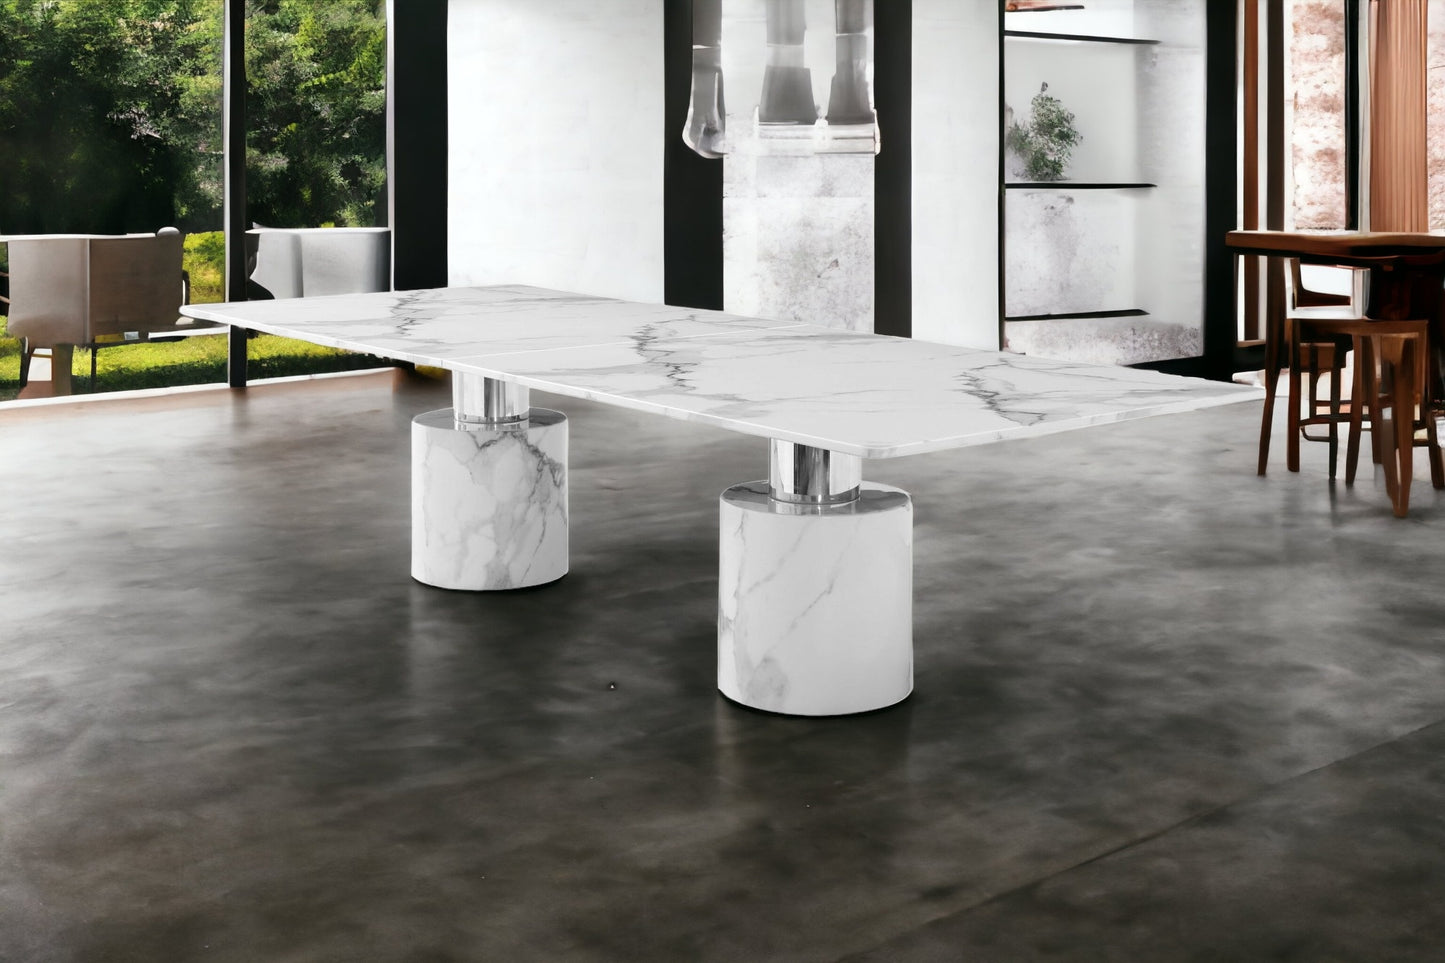 120" White Marble Dining Table